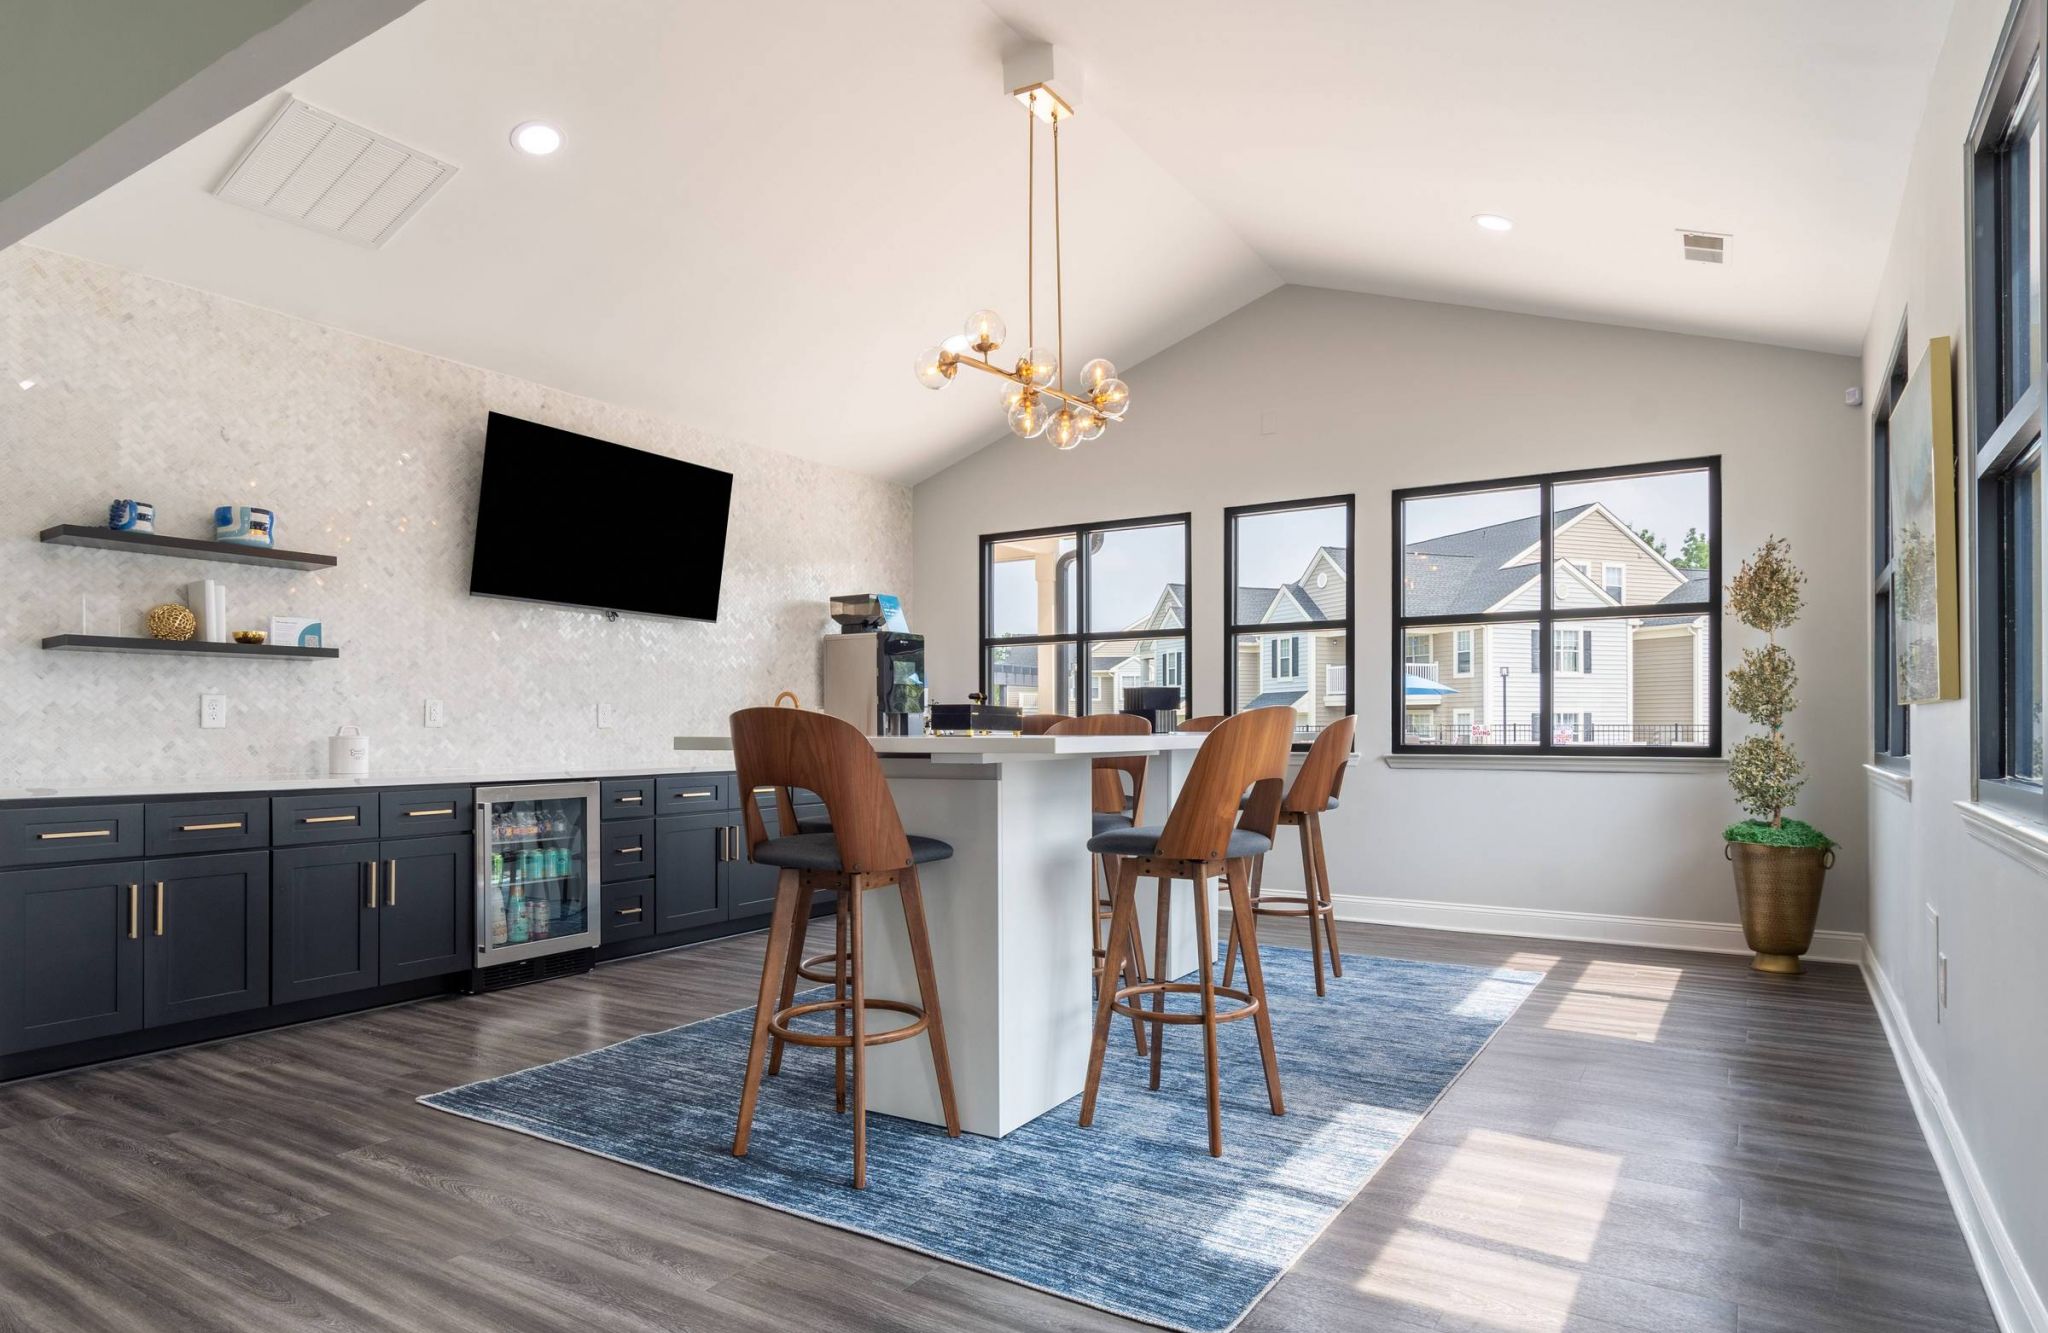 Hawthorne at the Pines modern clubhouse kitchen with dark cabinetry and bar seating, elegant pendant lighting, and a large window with a view.